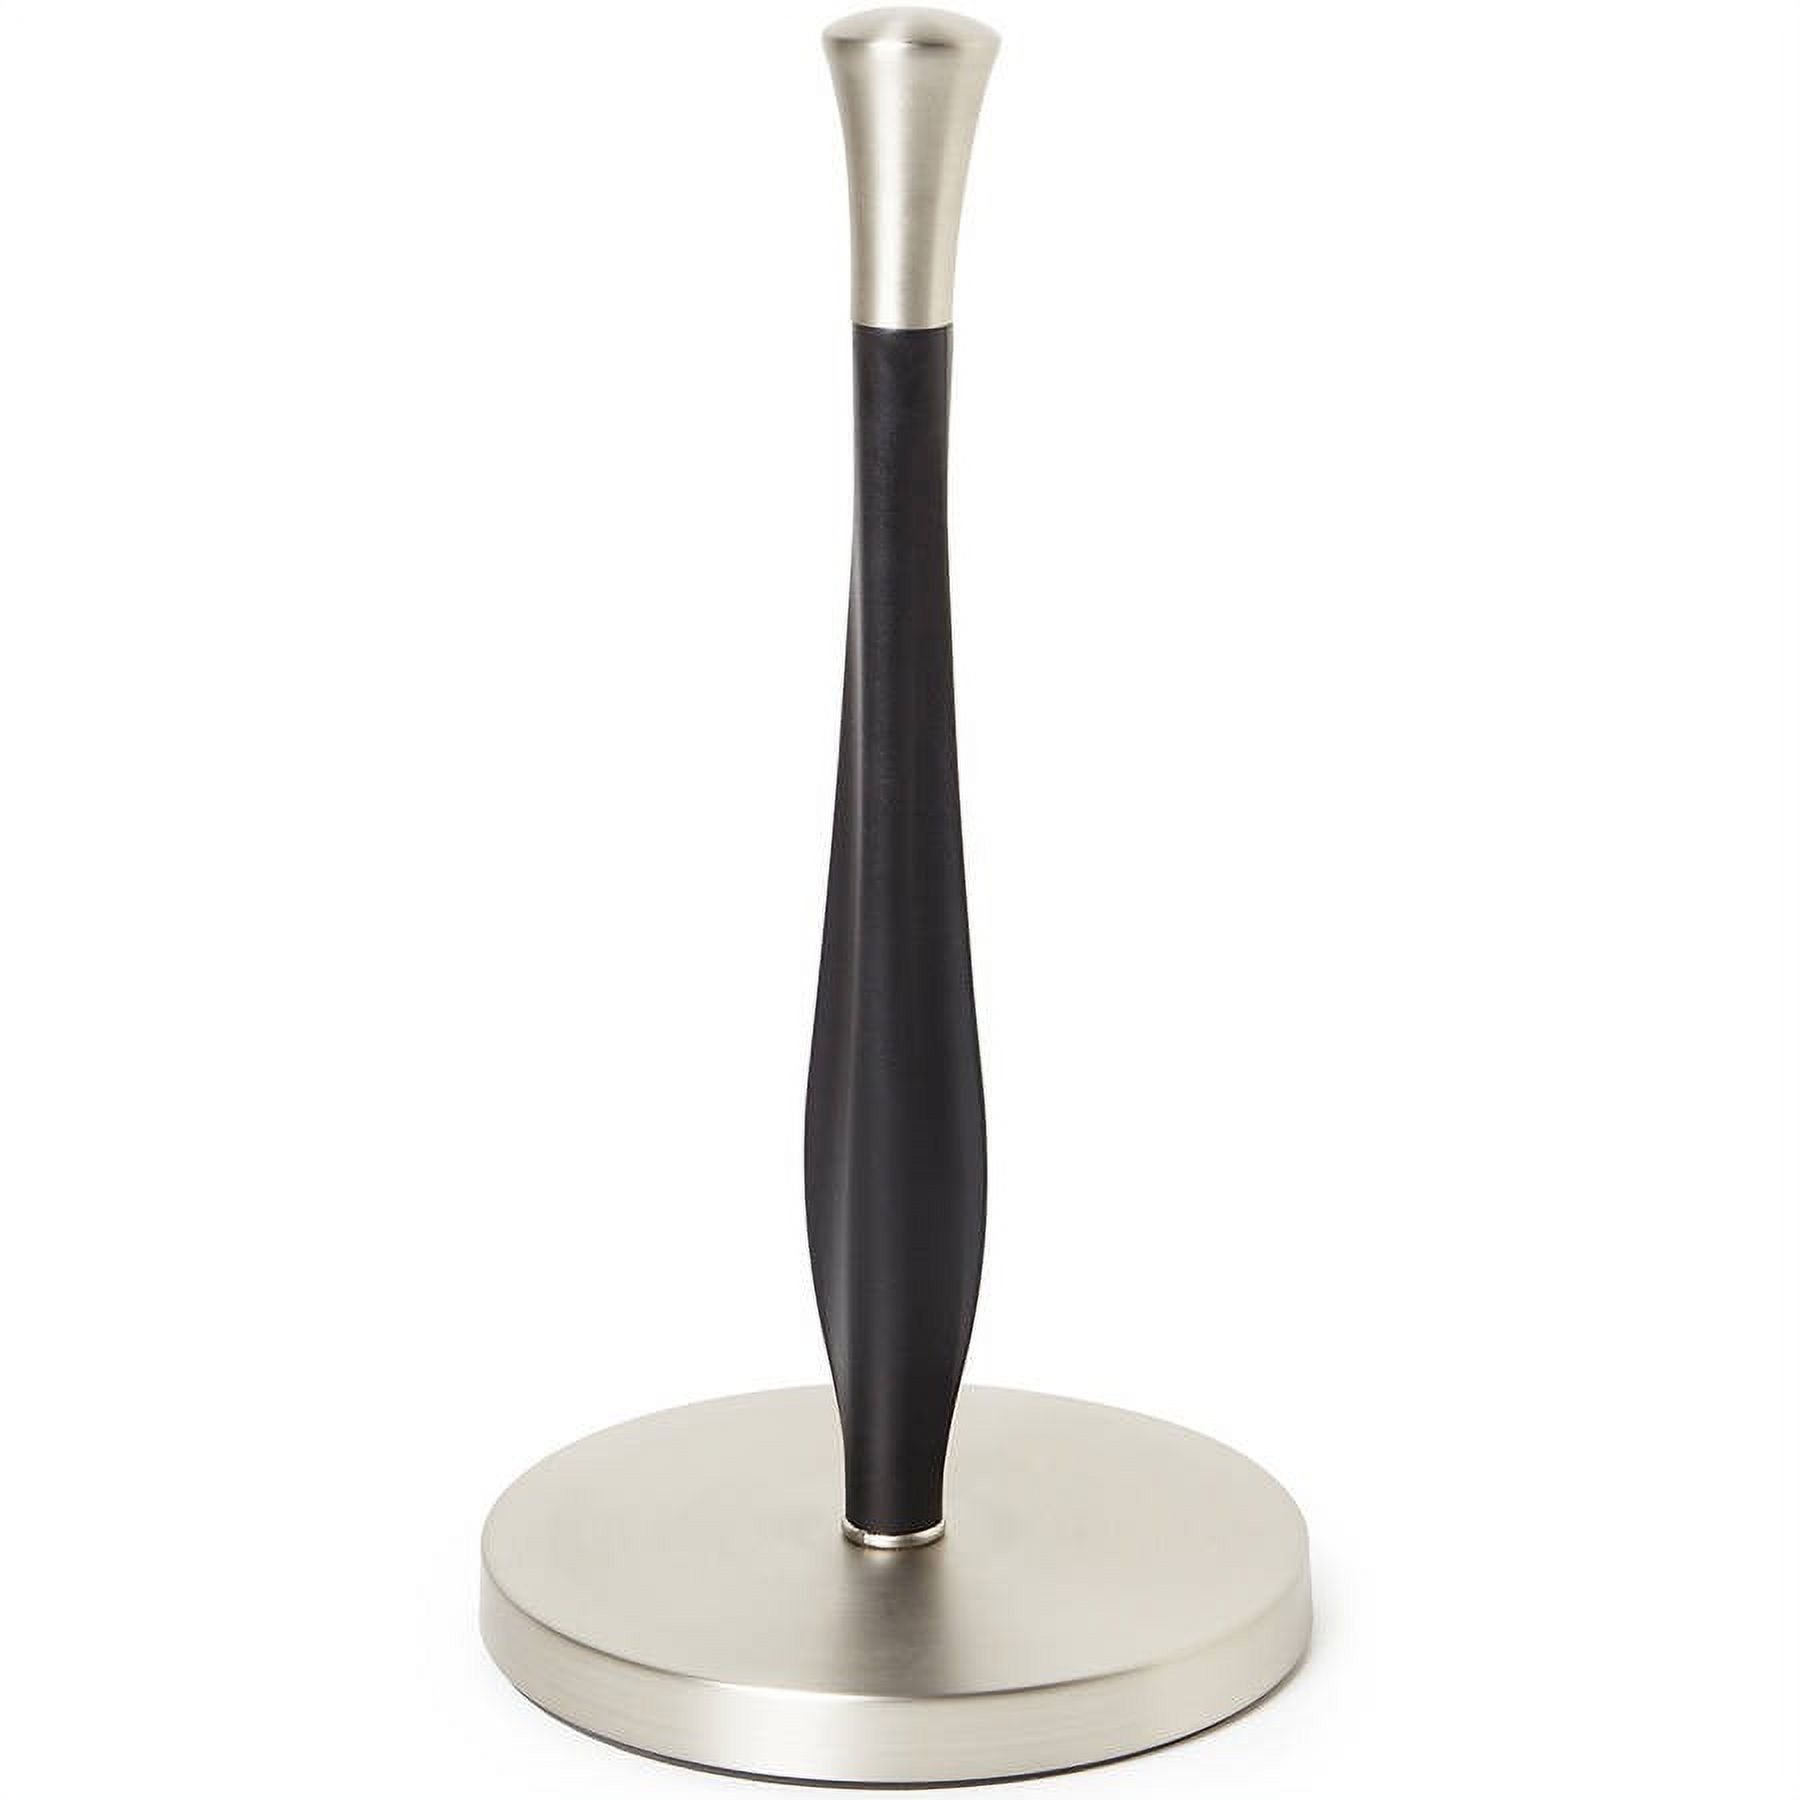 Better Homes & Gardens Free-Standing Paper Towel Holder with Weighted Non-Slip Base, 14 Inch, Nickel - image 1 of 7